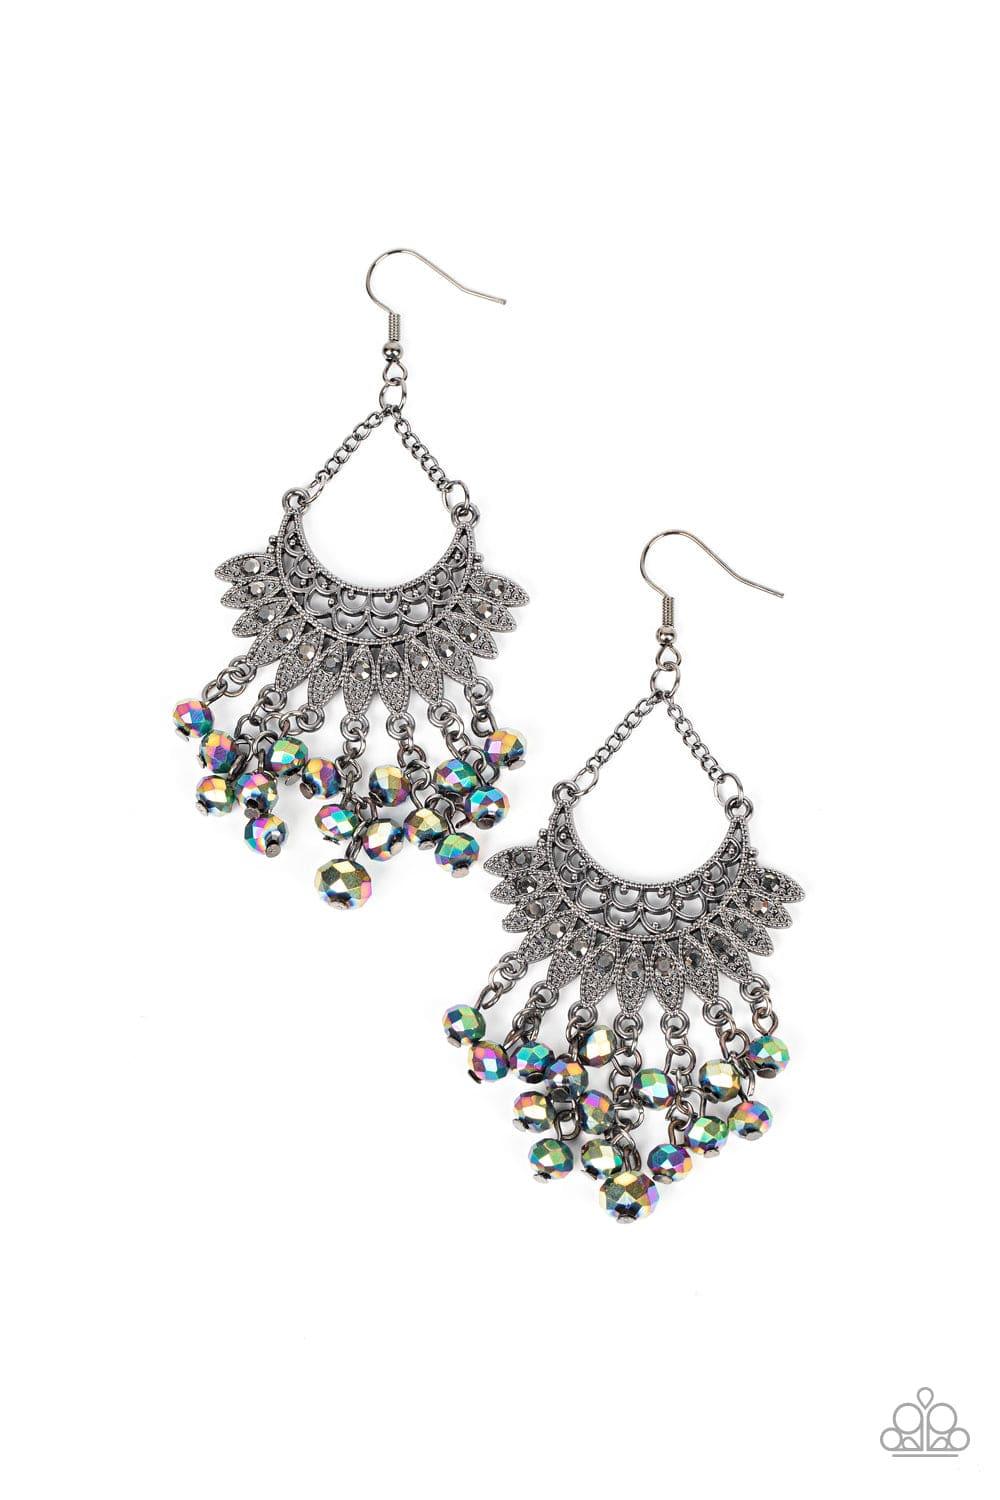 Paparazzi Accessories - Chromatic Cascade - Multicolor Oil-spill Earrings - Bling by JessieK